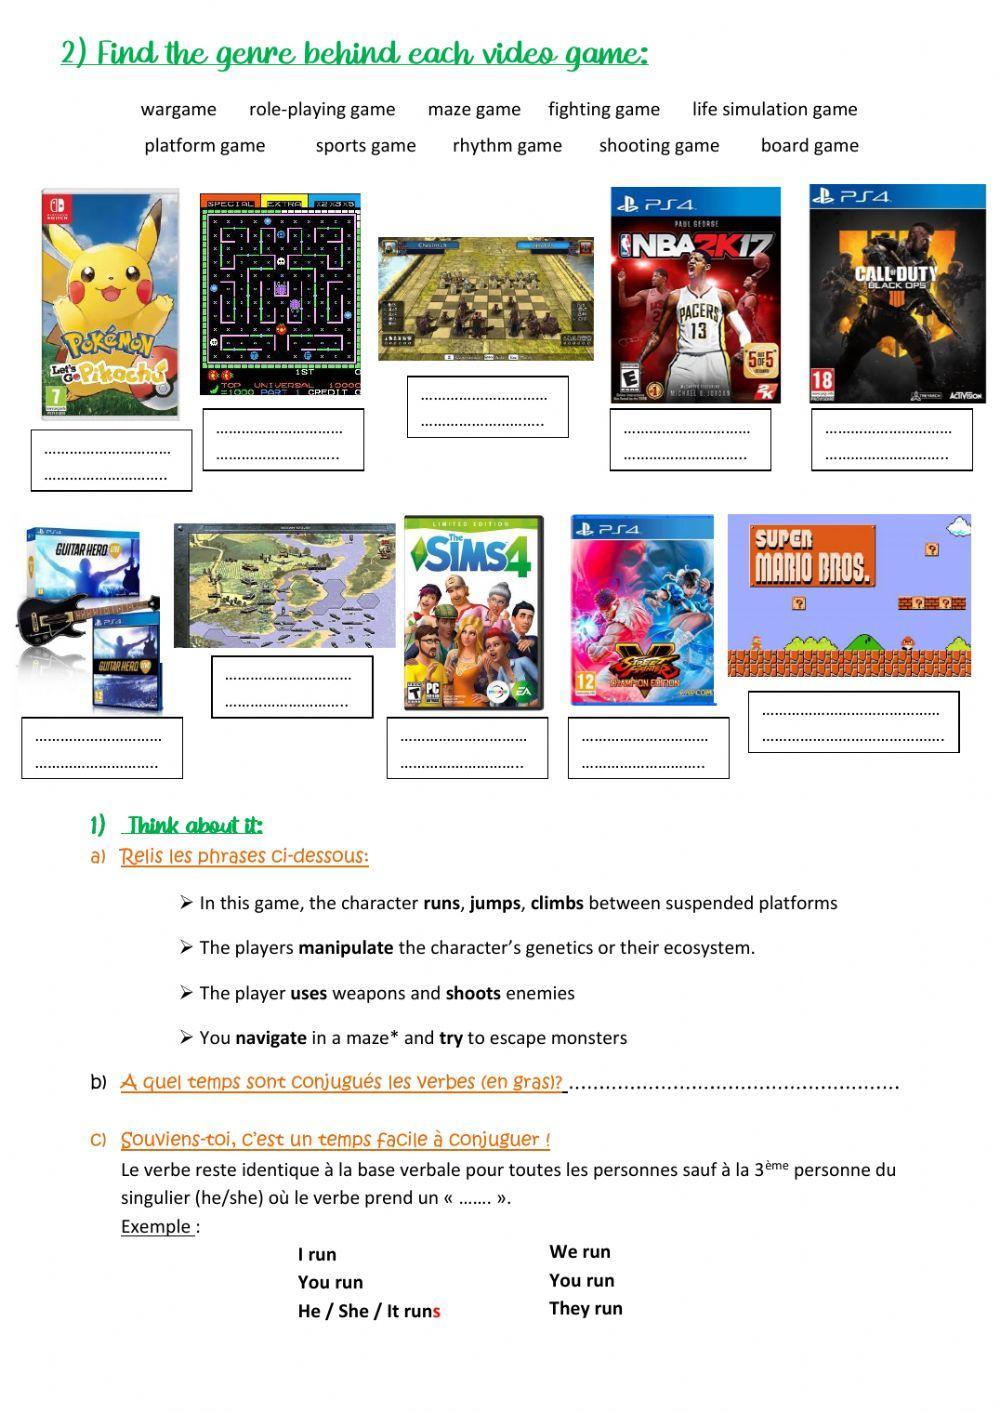 Various types of video games